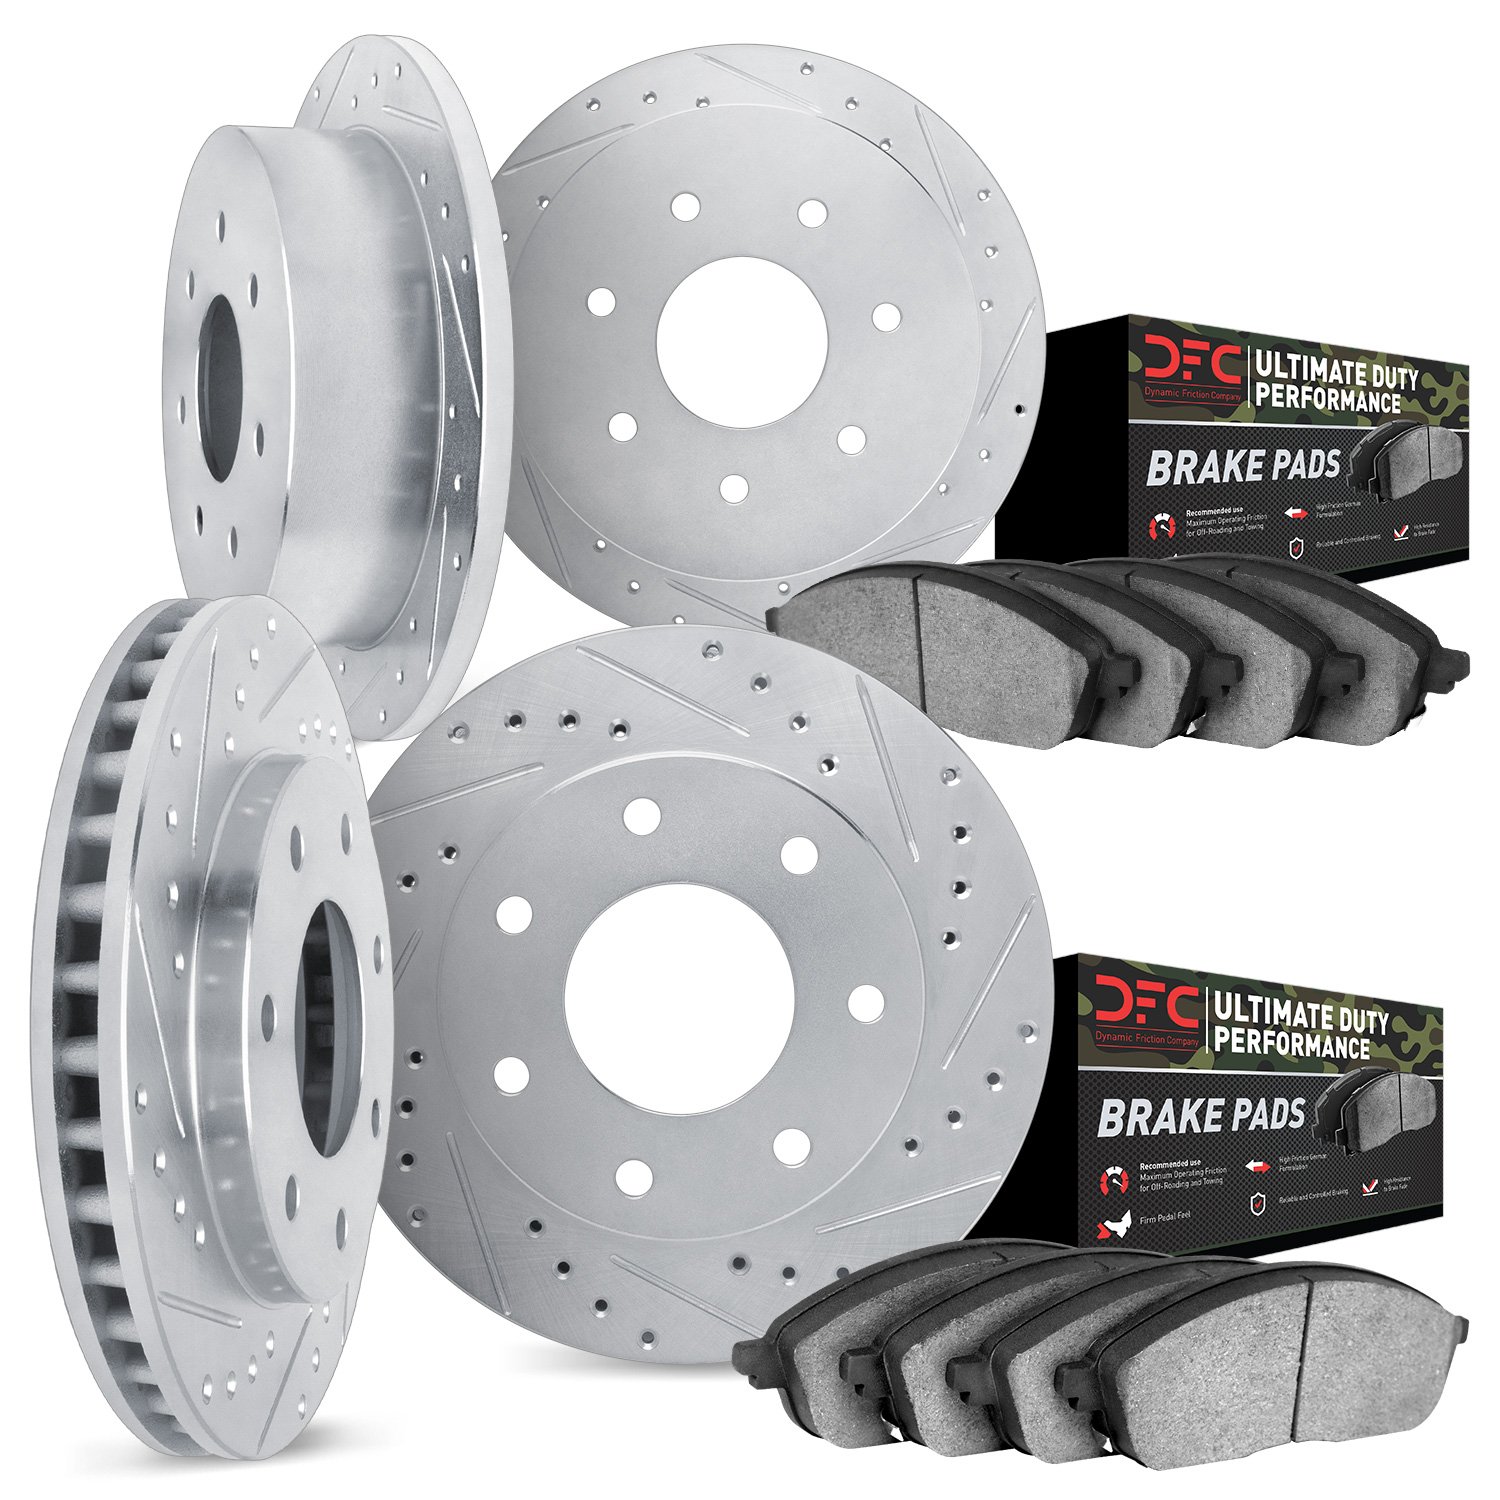 7404-54006 Drilled/Slotted Brake Rotors with Ultimate-Duty Brake Pads Kit [Silver], 1997-2004 Ford/Lincoln/Mercury/Mazda, Positi